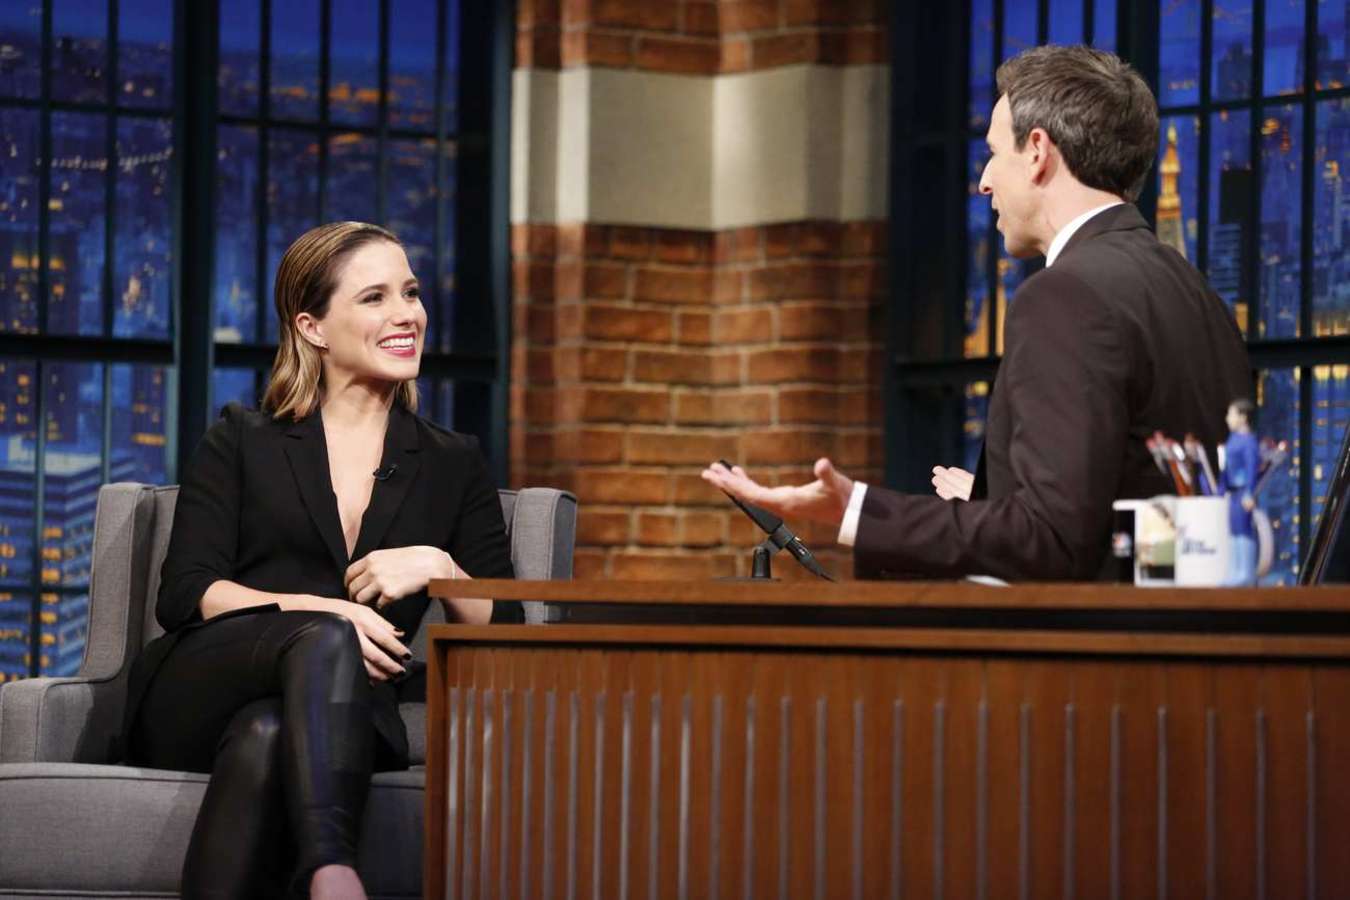 Sophia Bush during an interview with host Seth Meyers